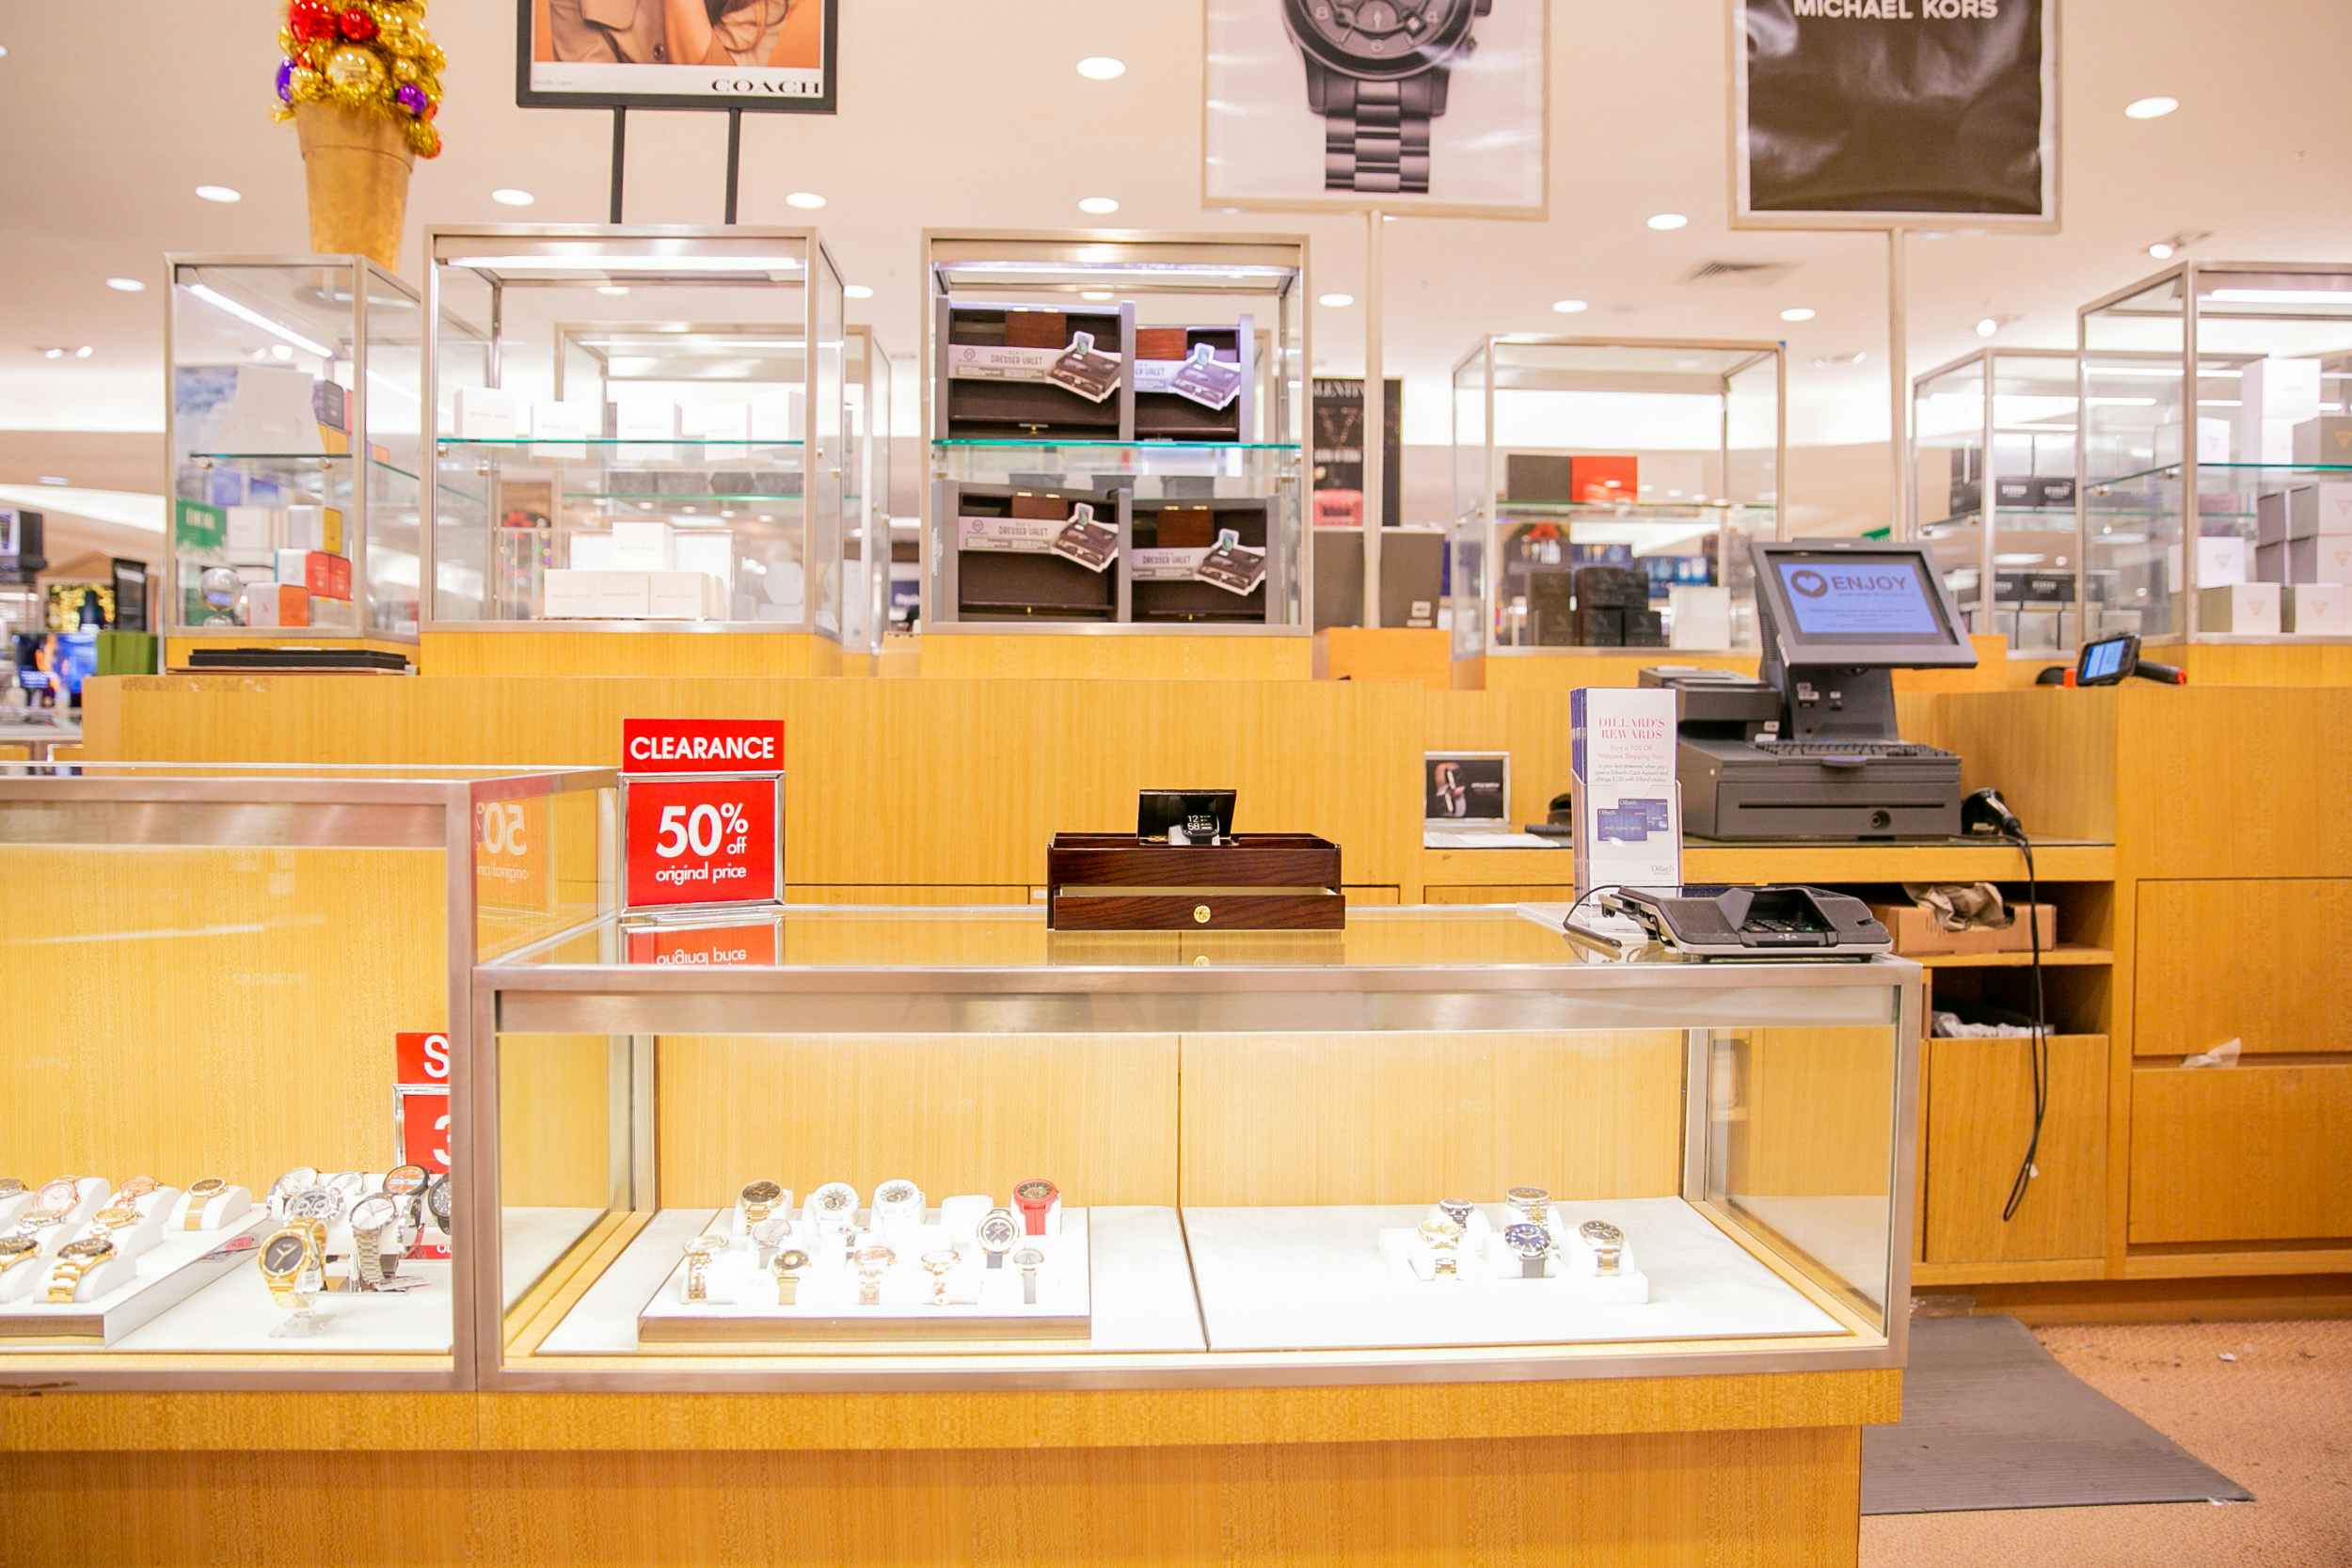 Watch counter at Dillards with a red discounted sign 